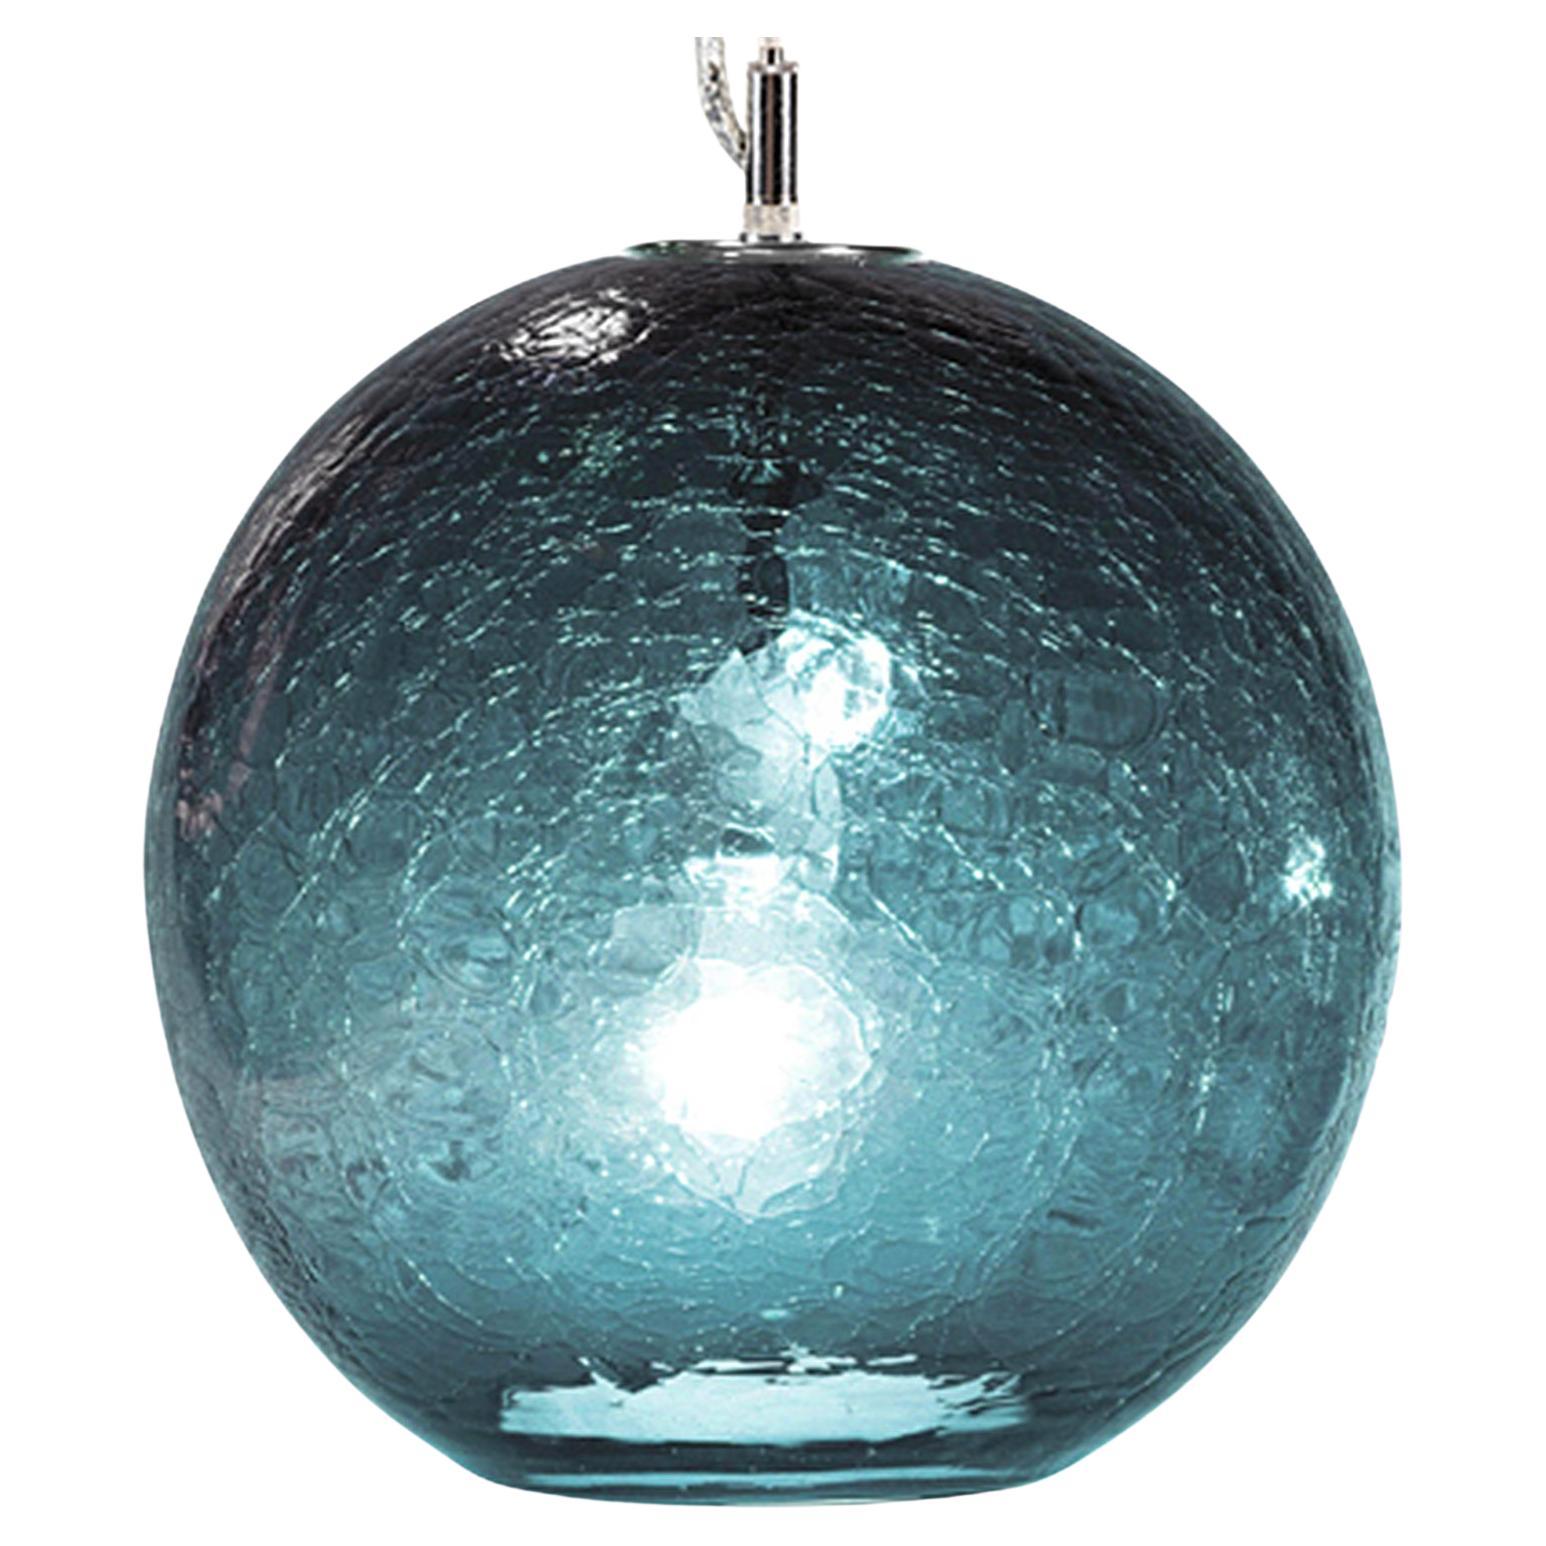 Teal Solaris Pendant from the Boa Lighting Collection